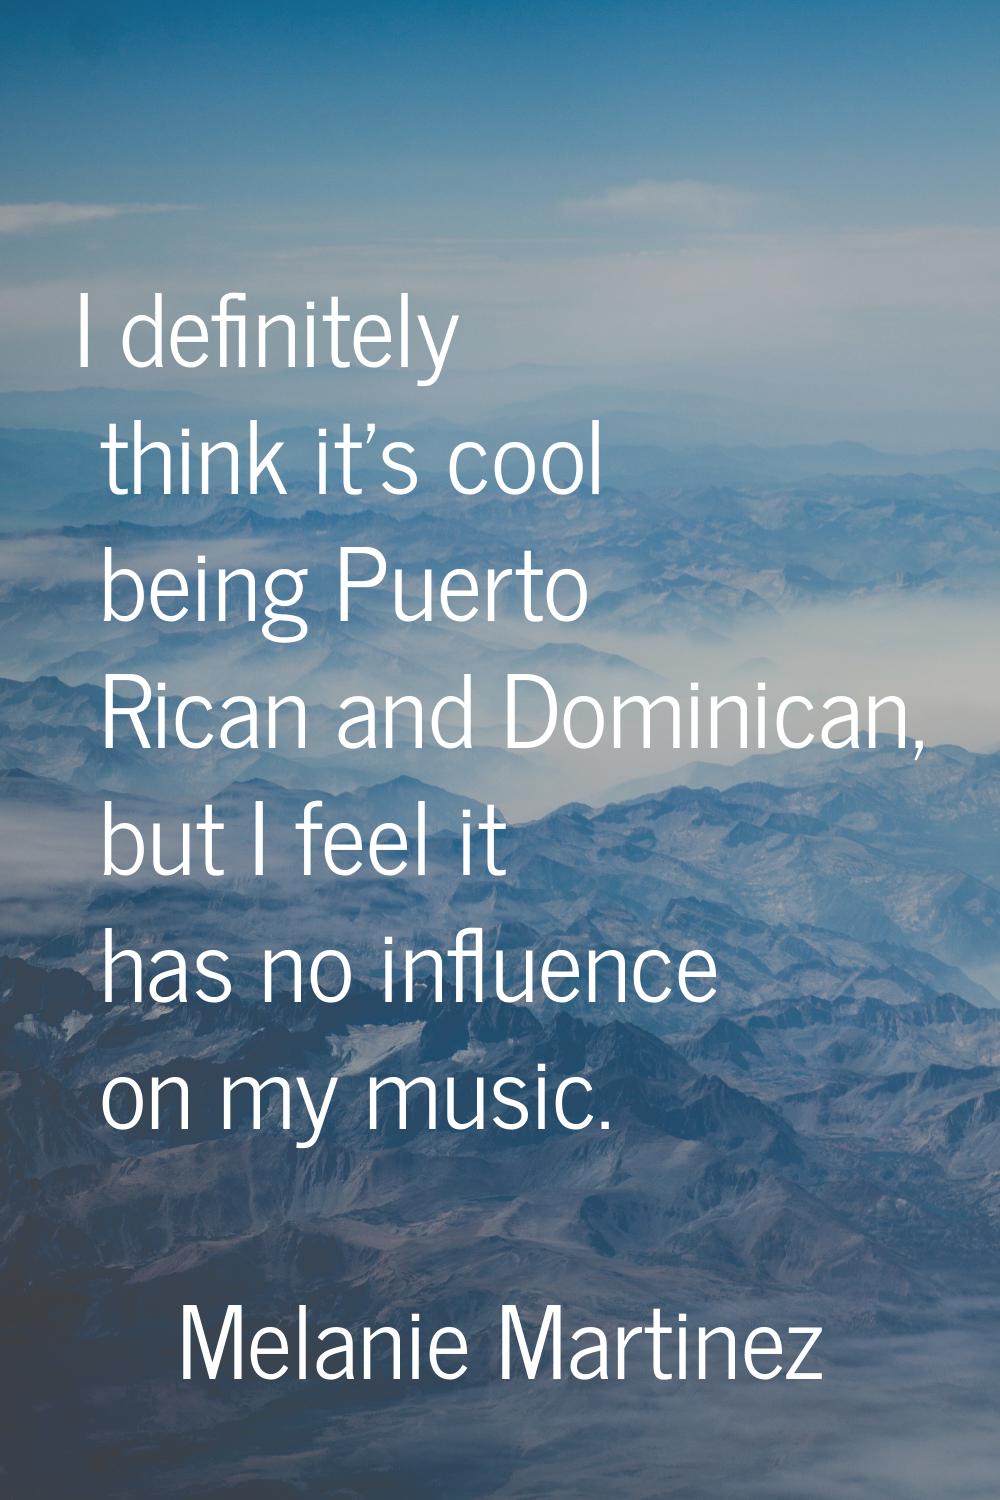 I definitely think it's cool being Puerto Rican and Dominican, but I feel it has no influence on my